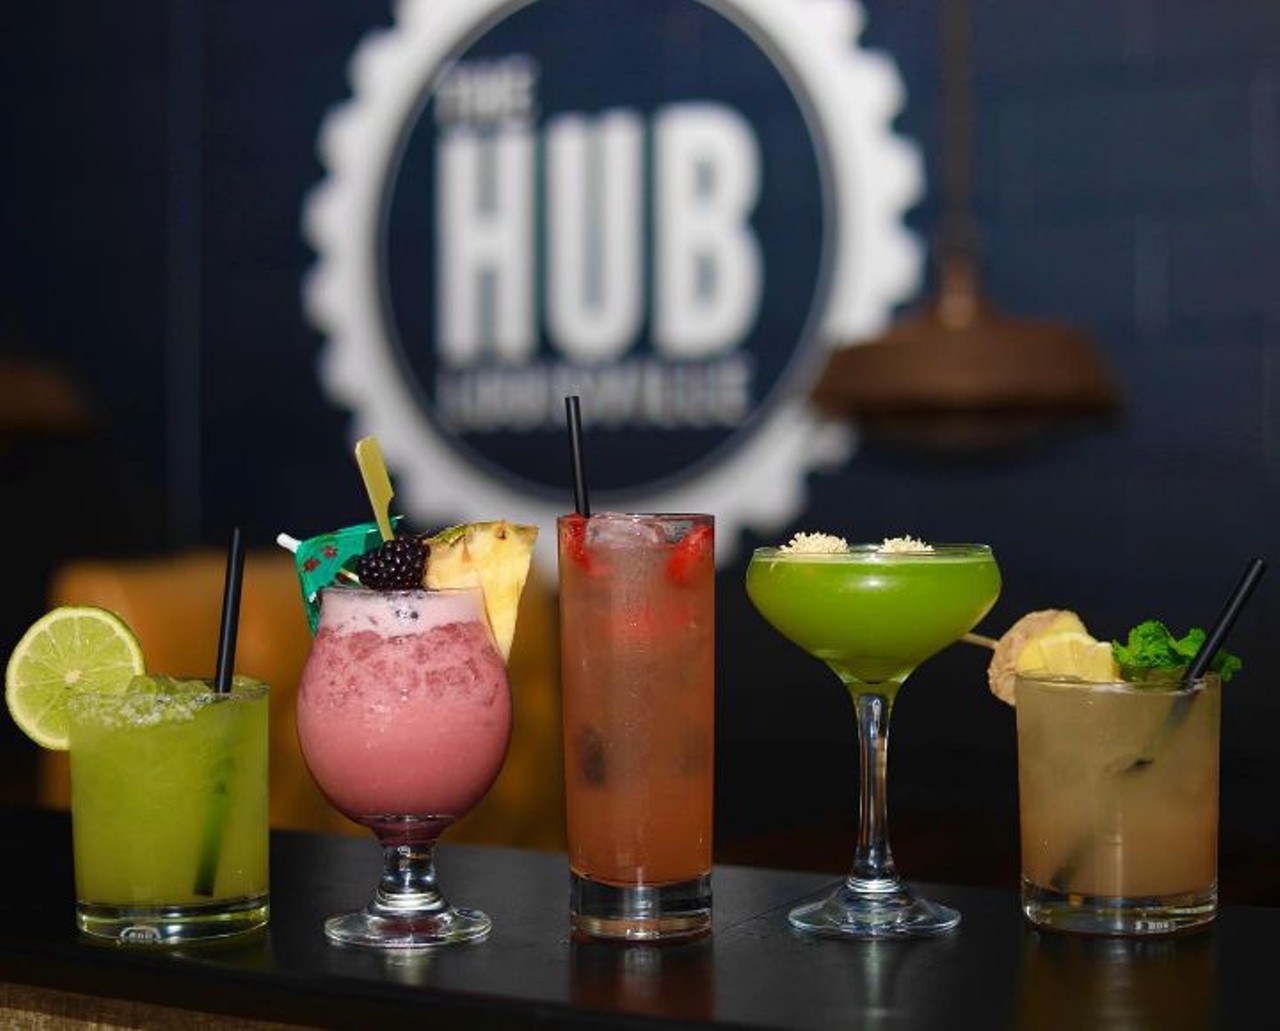 The Hub
2235 Frankfort Ave. 
Food, Drinks and Fun are the order at The Hub. Come for the drink, stay for the dancing.Photo via The Hub